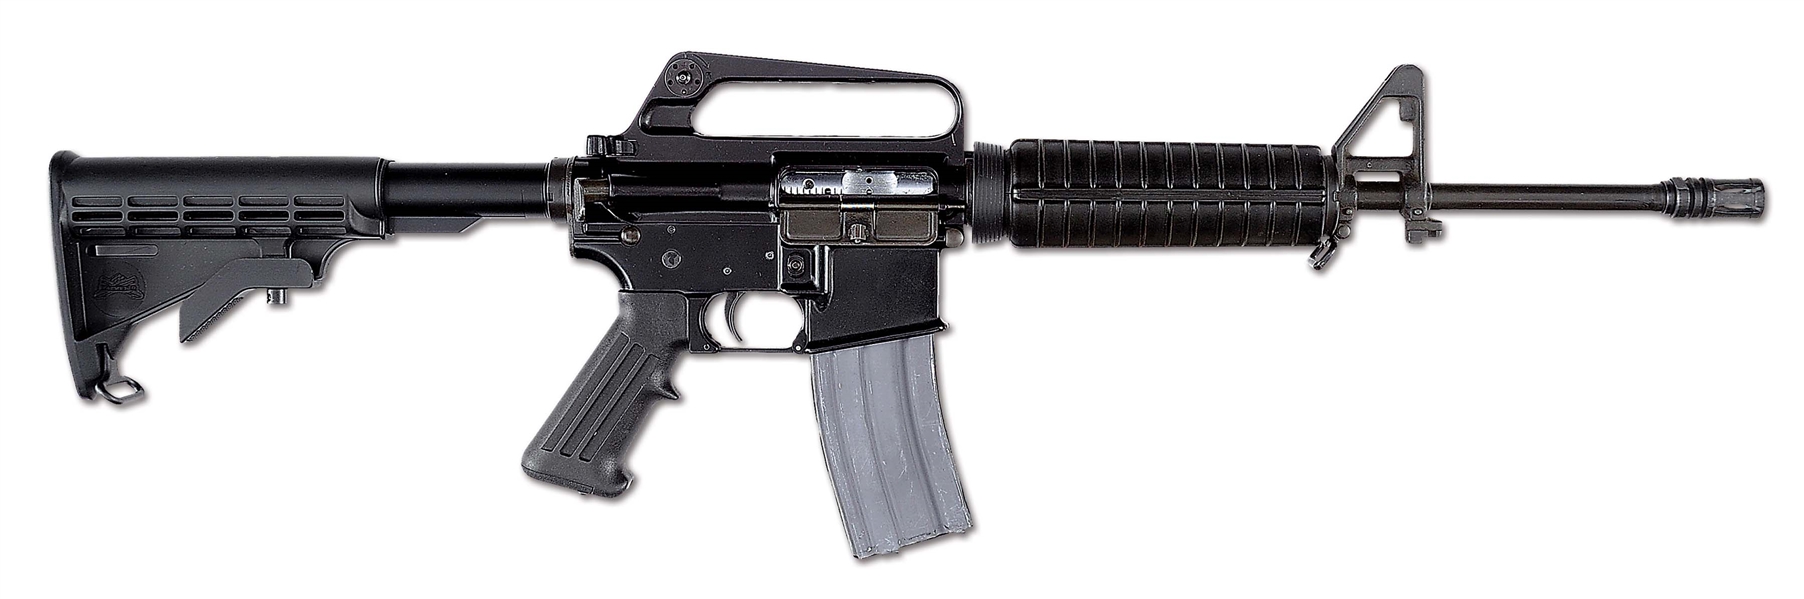 (N) FINE OLYMPIC ARMS REGISTERED M16 CLONE WITH TELESCOPING STOCK (FULLY TRANSFERABLE).